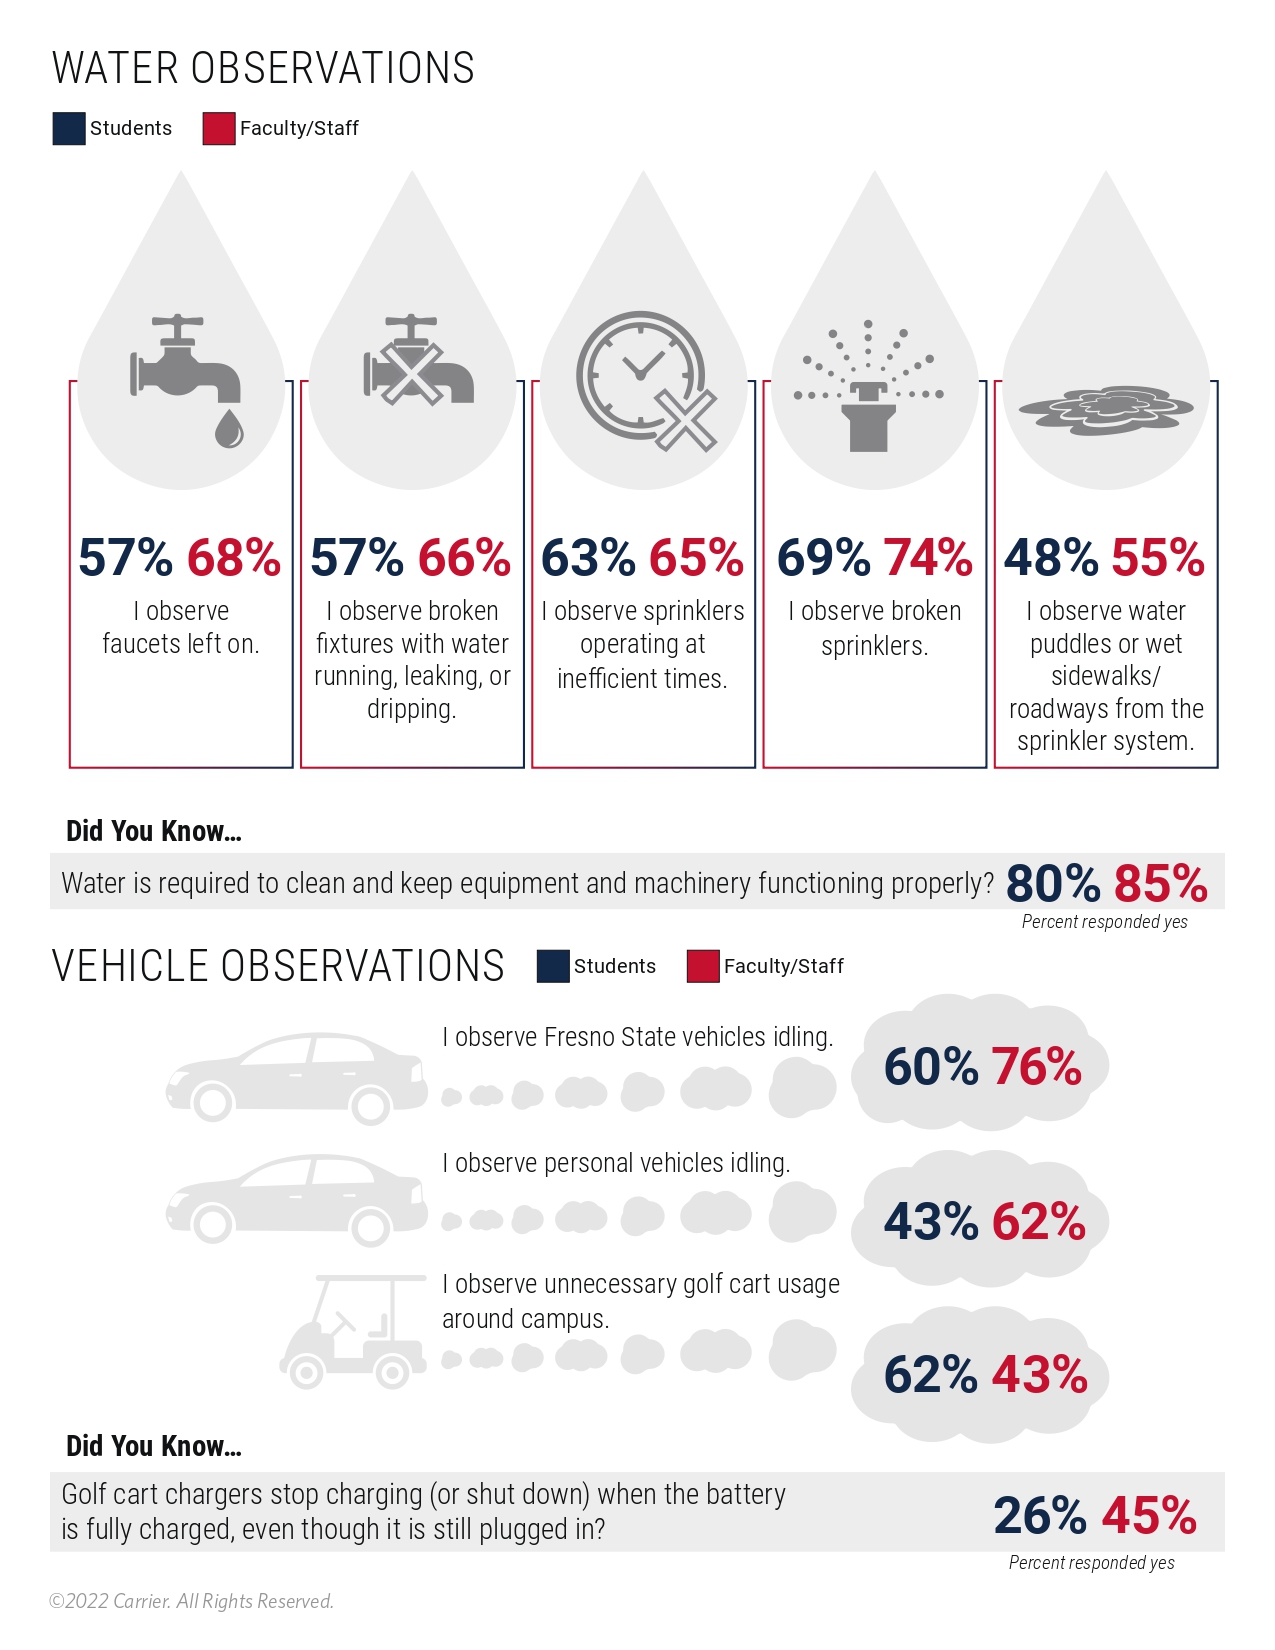 Water and Vehicle Observations